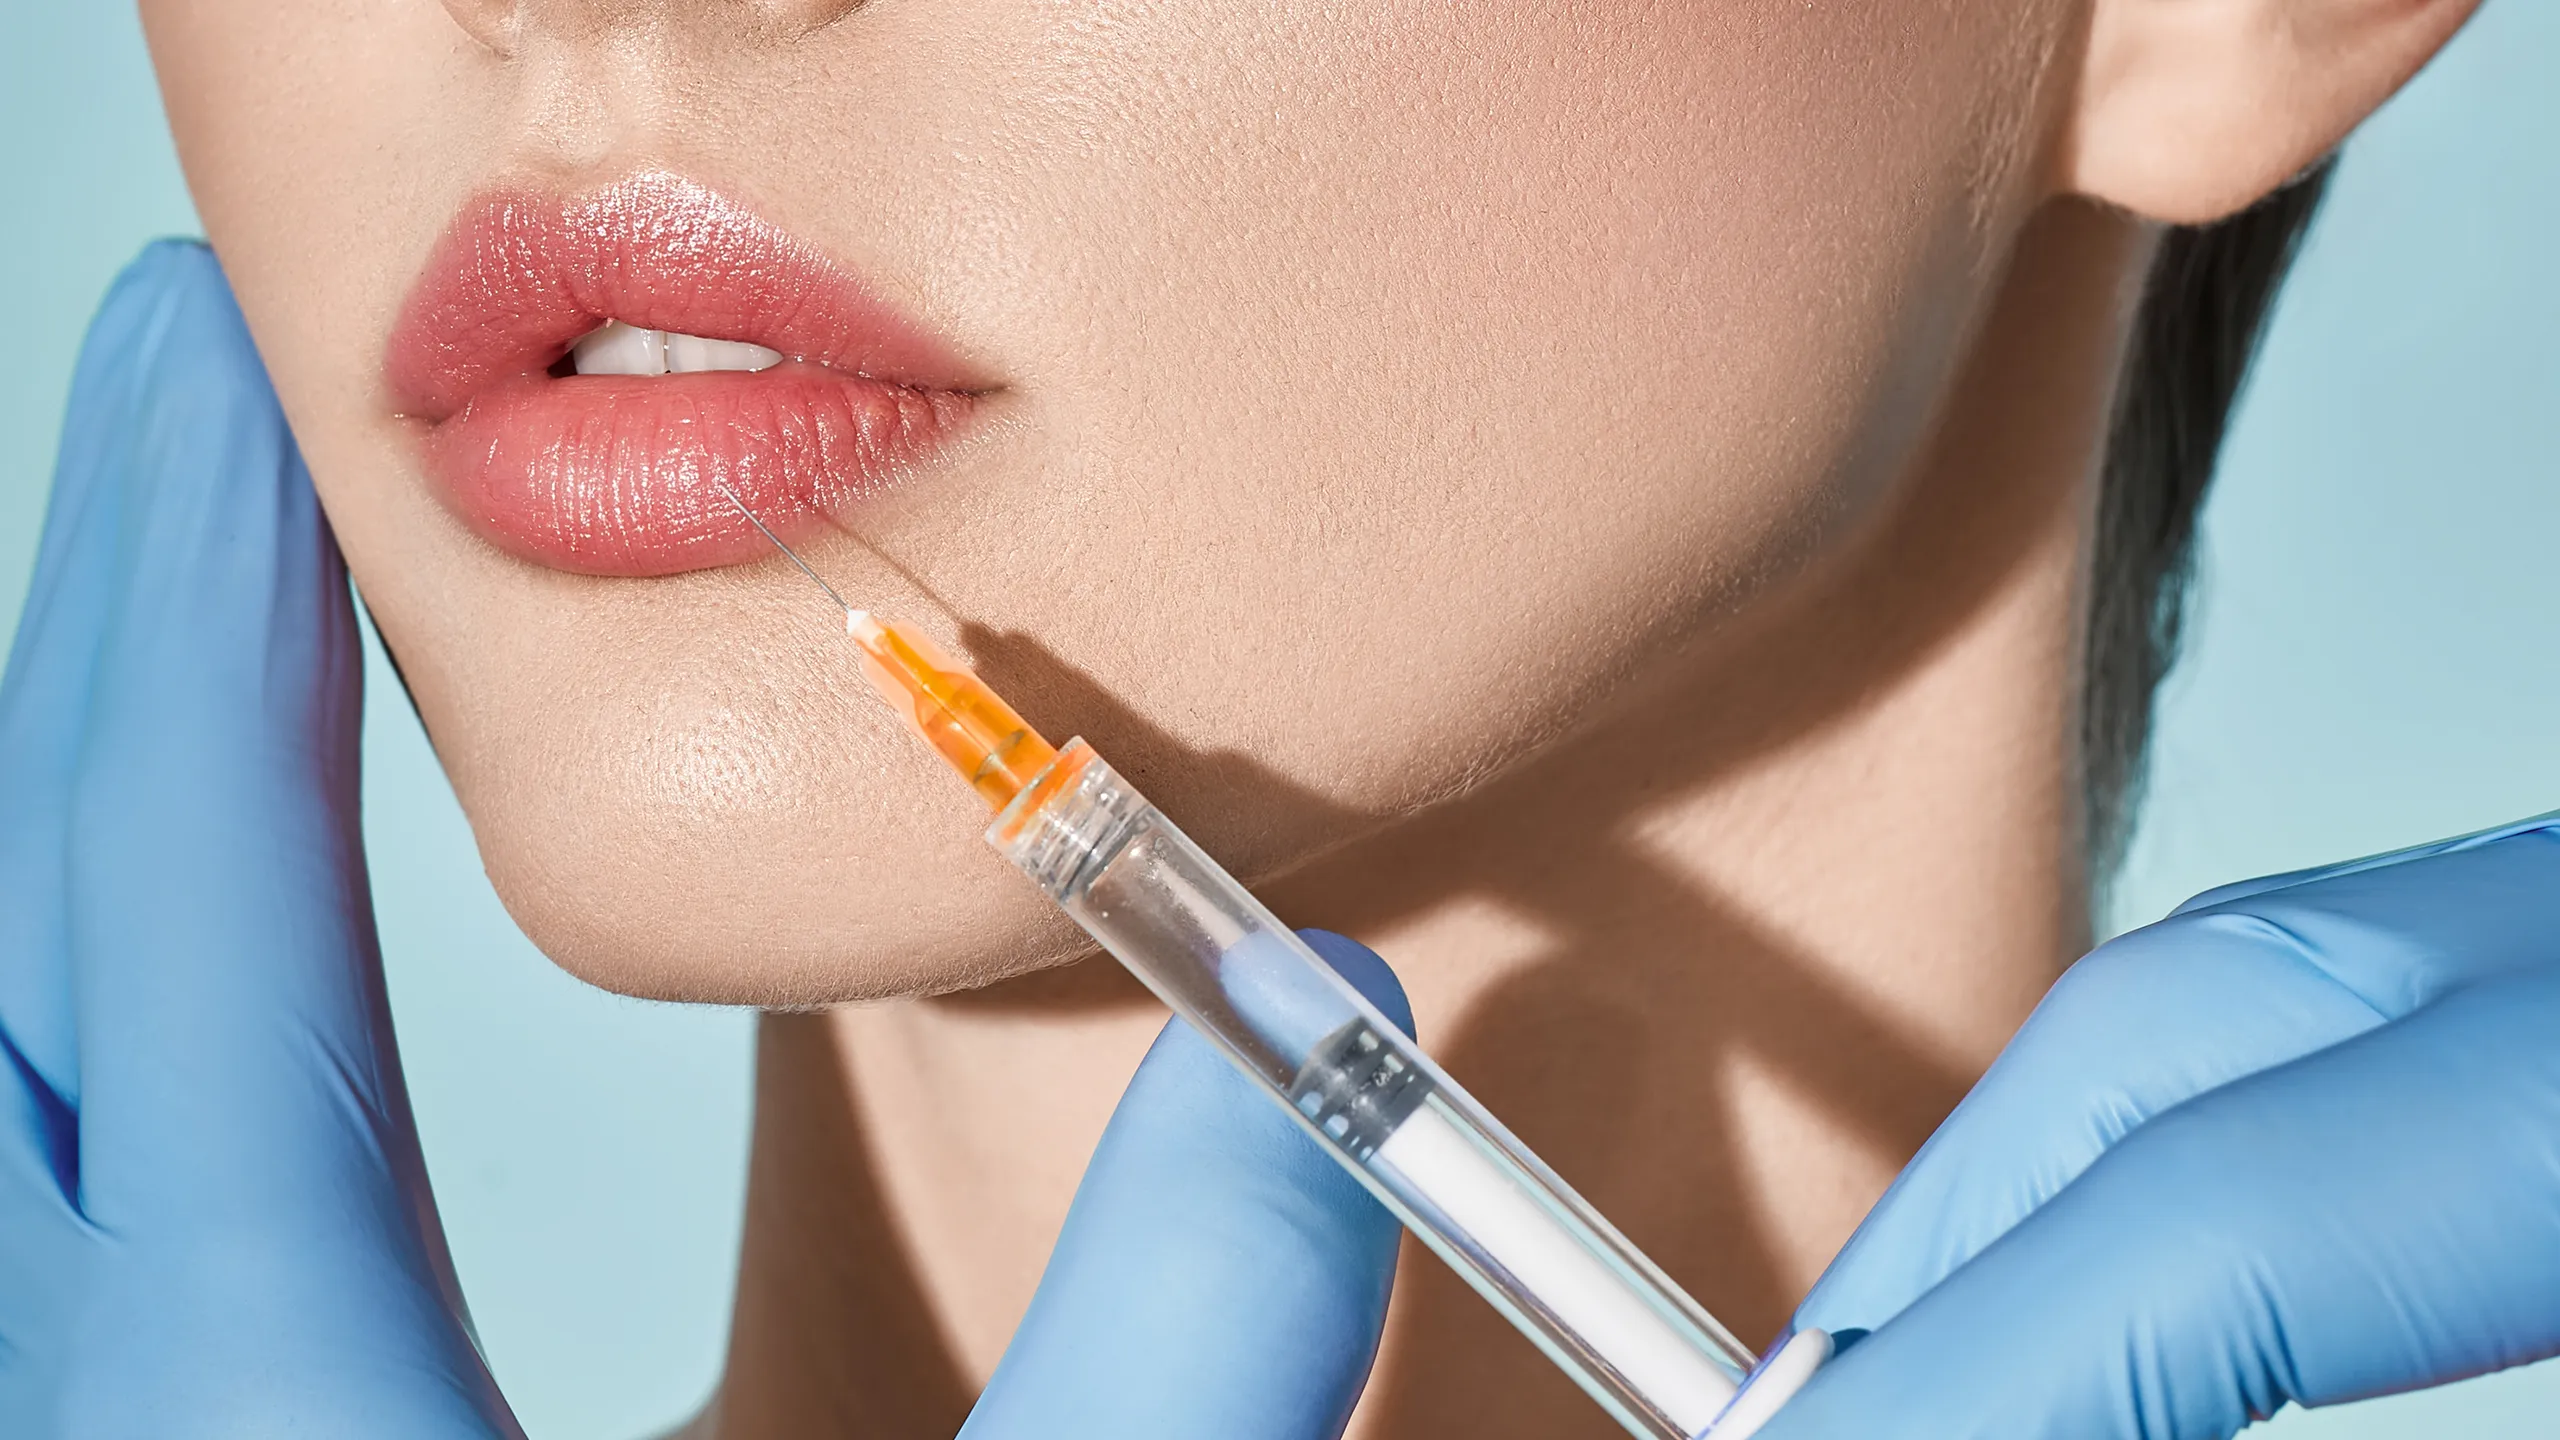 Lip Fillers injections